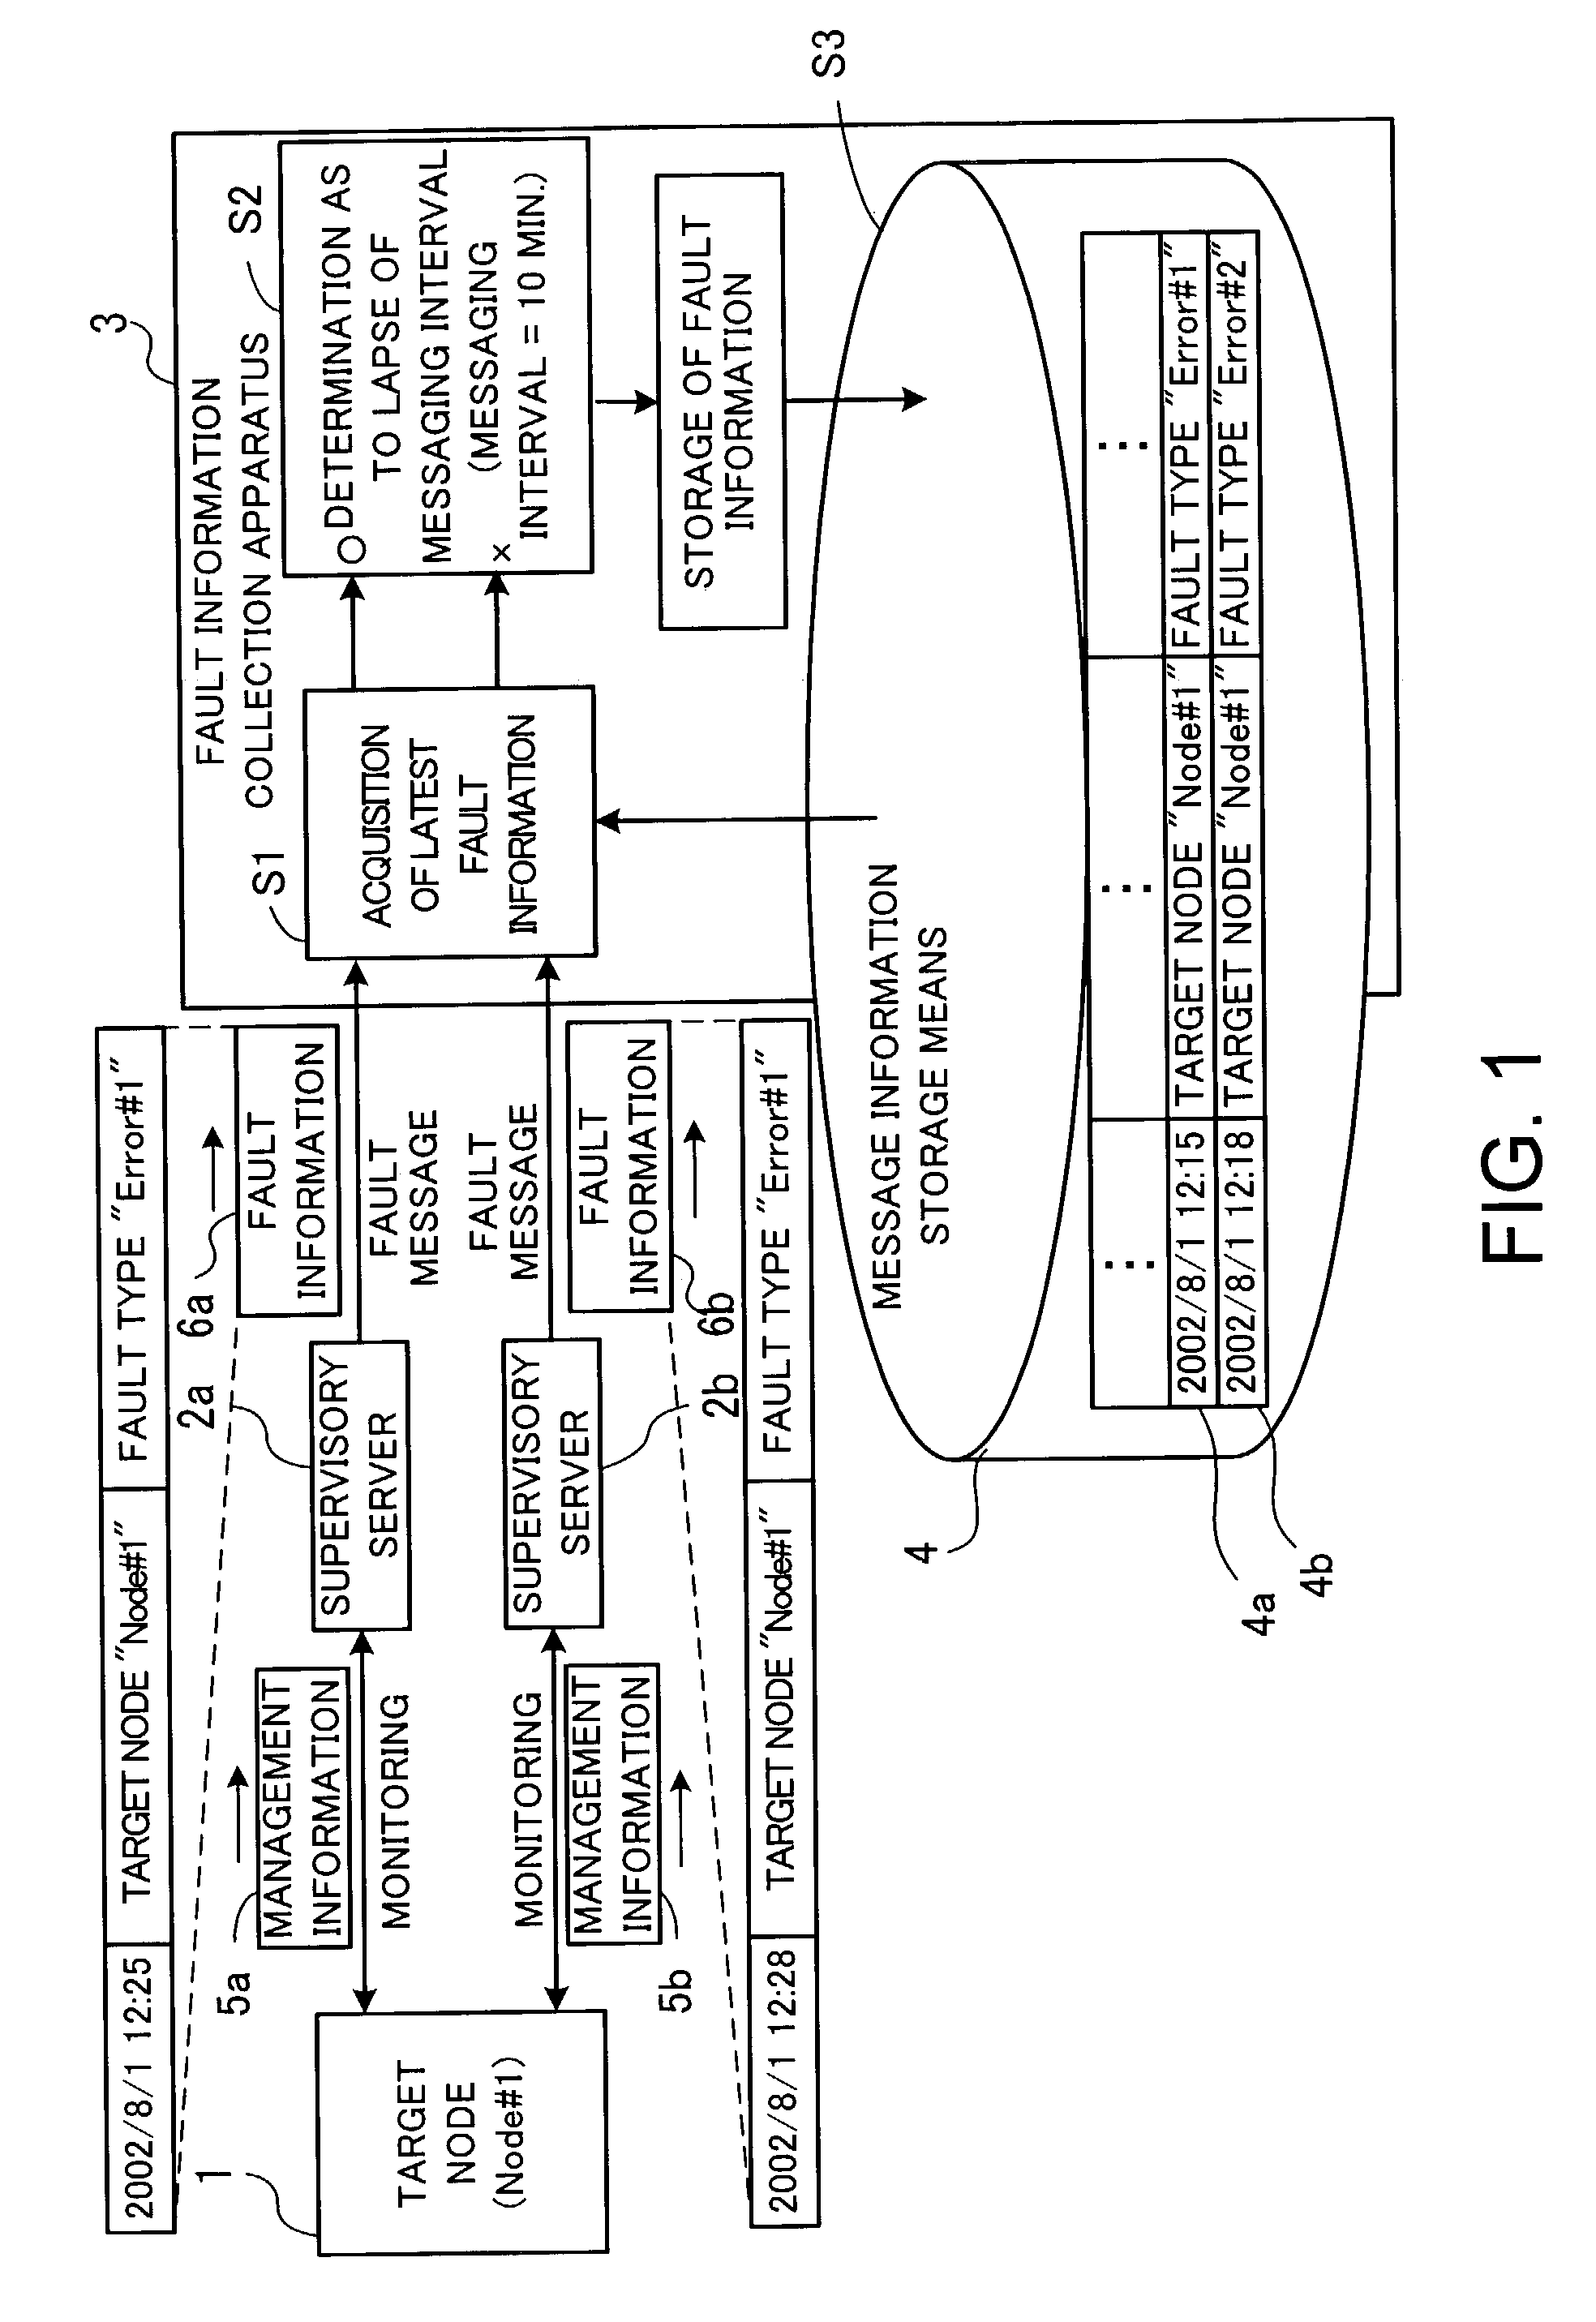 Fault information collection program and apparatus